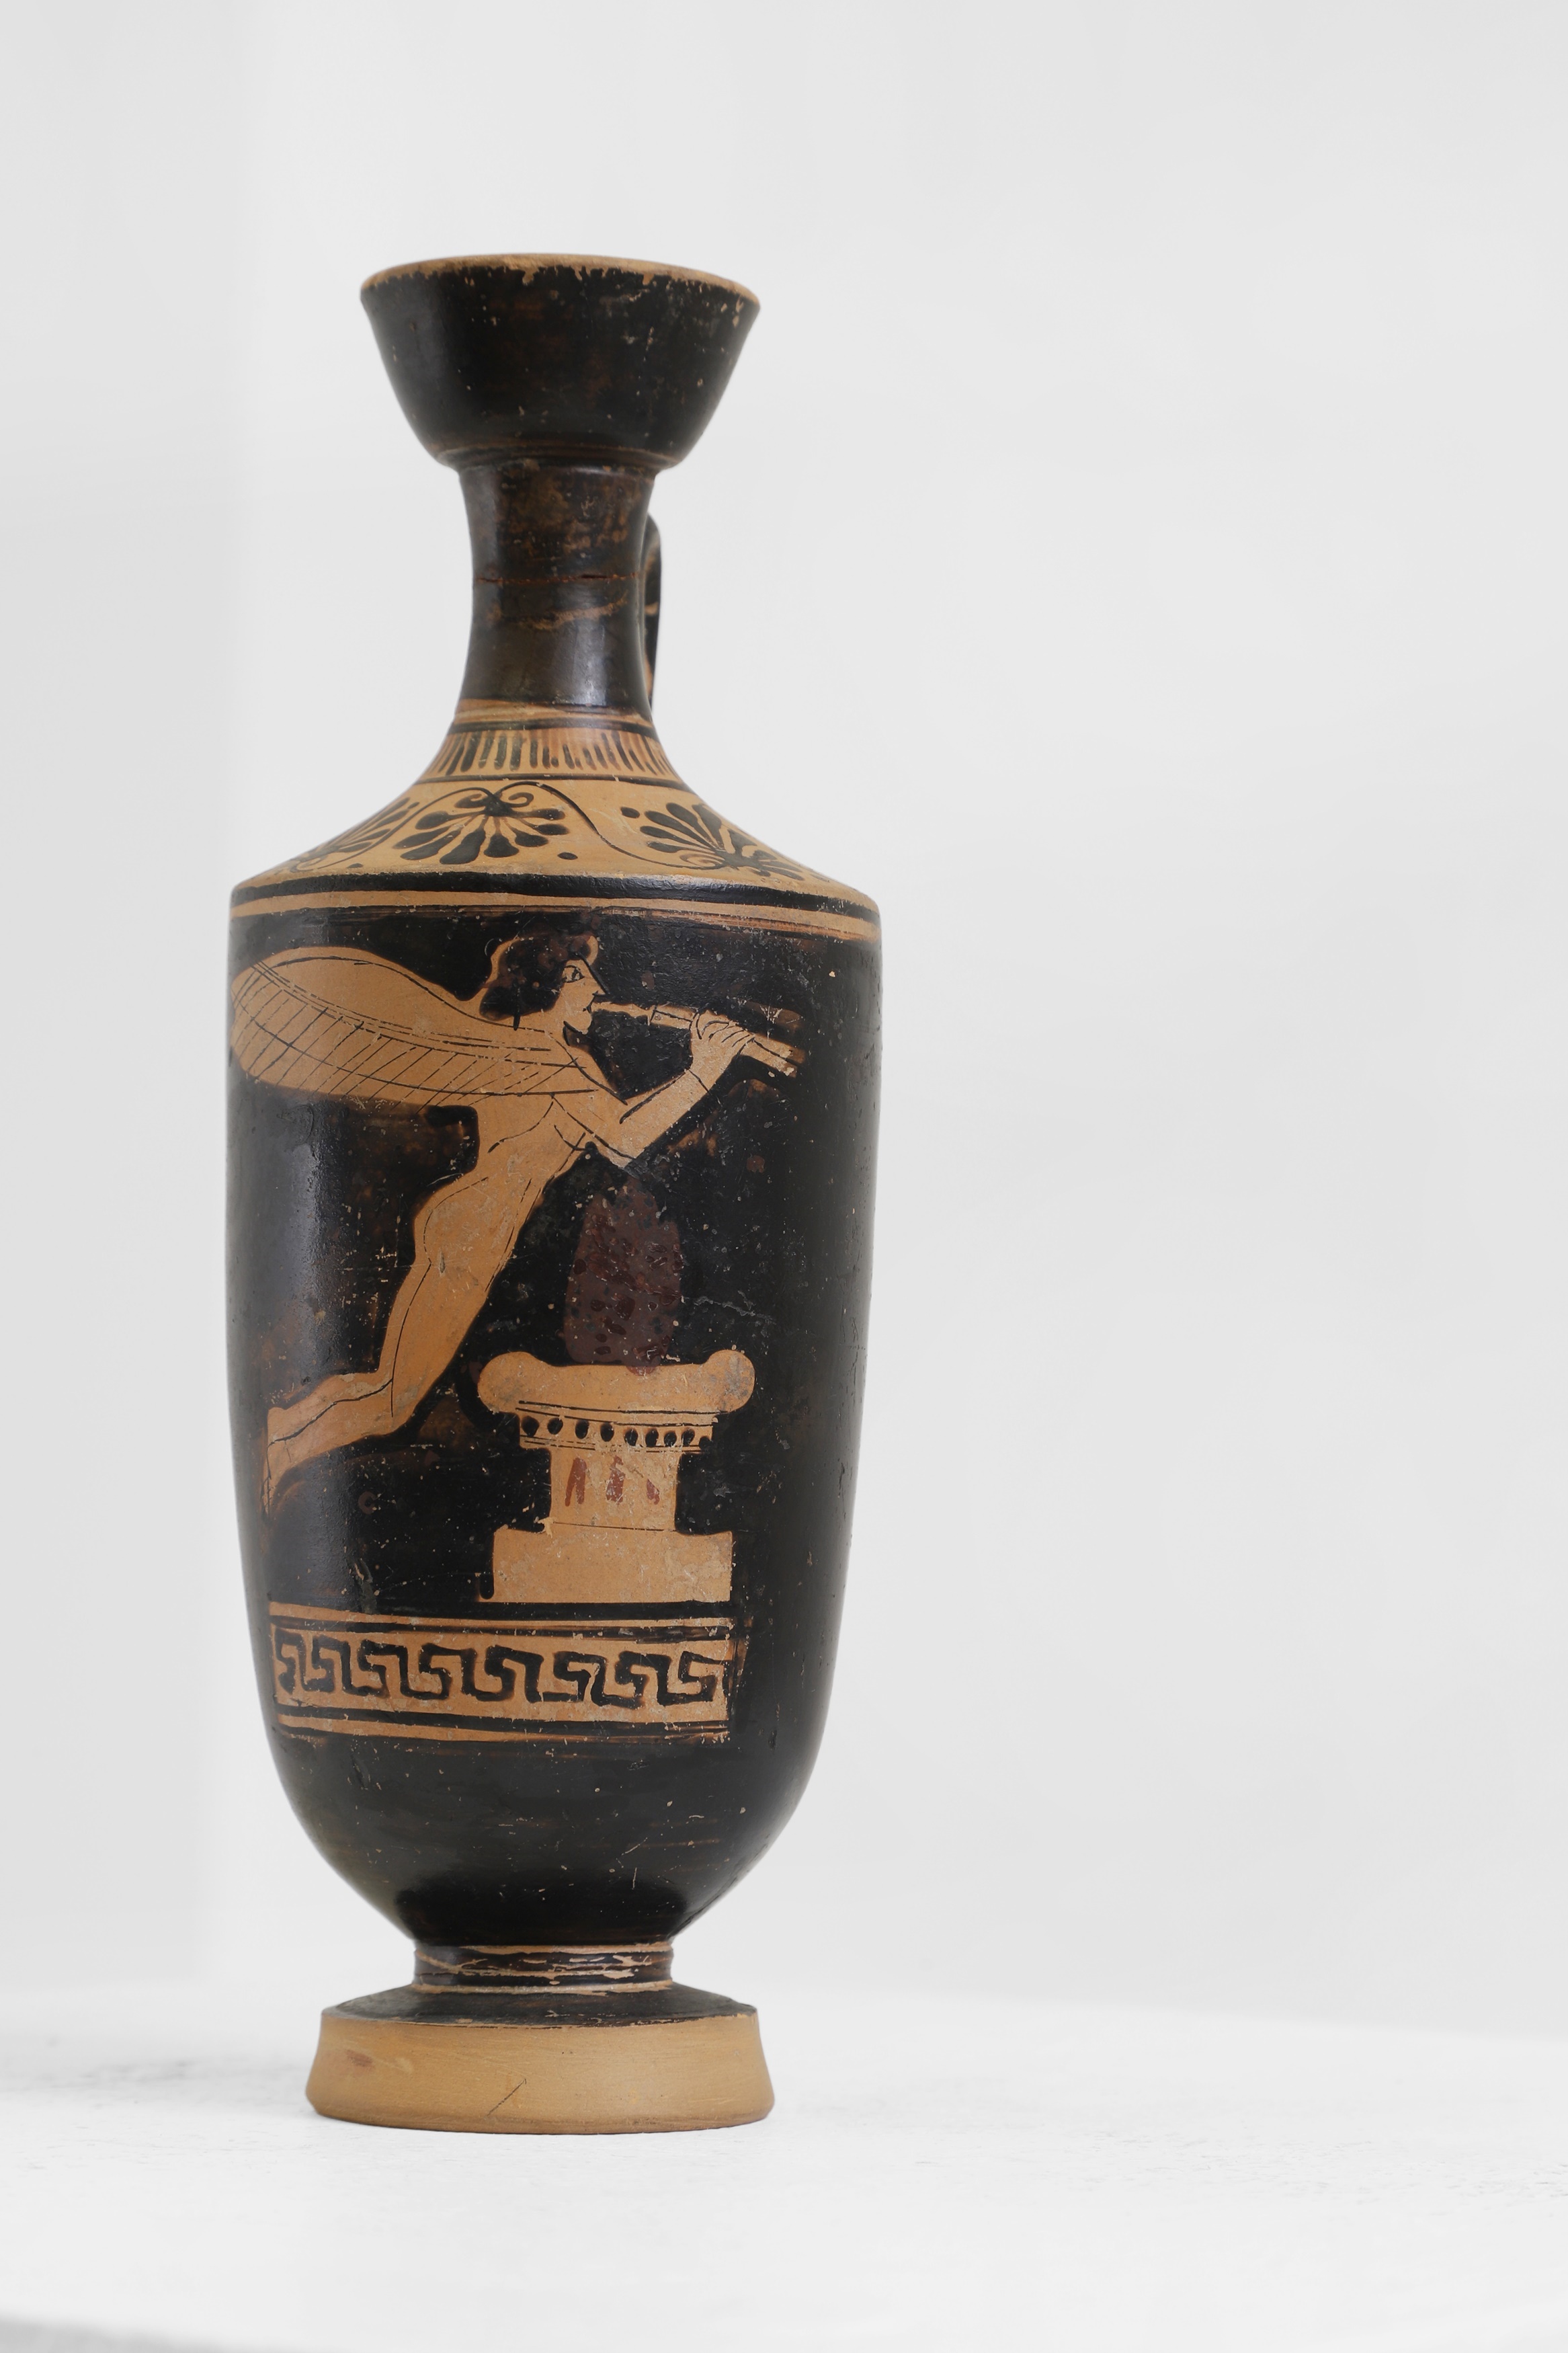 An Attic red-figure lekythos, c.5th century BC, Greek, attributed to the Bowdoin Painter (c.475-425 BC), decorated with Eros playing pipes over a funerary altar, with linked palmettes to the shoulder, 6.5cm wide 19cm high